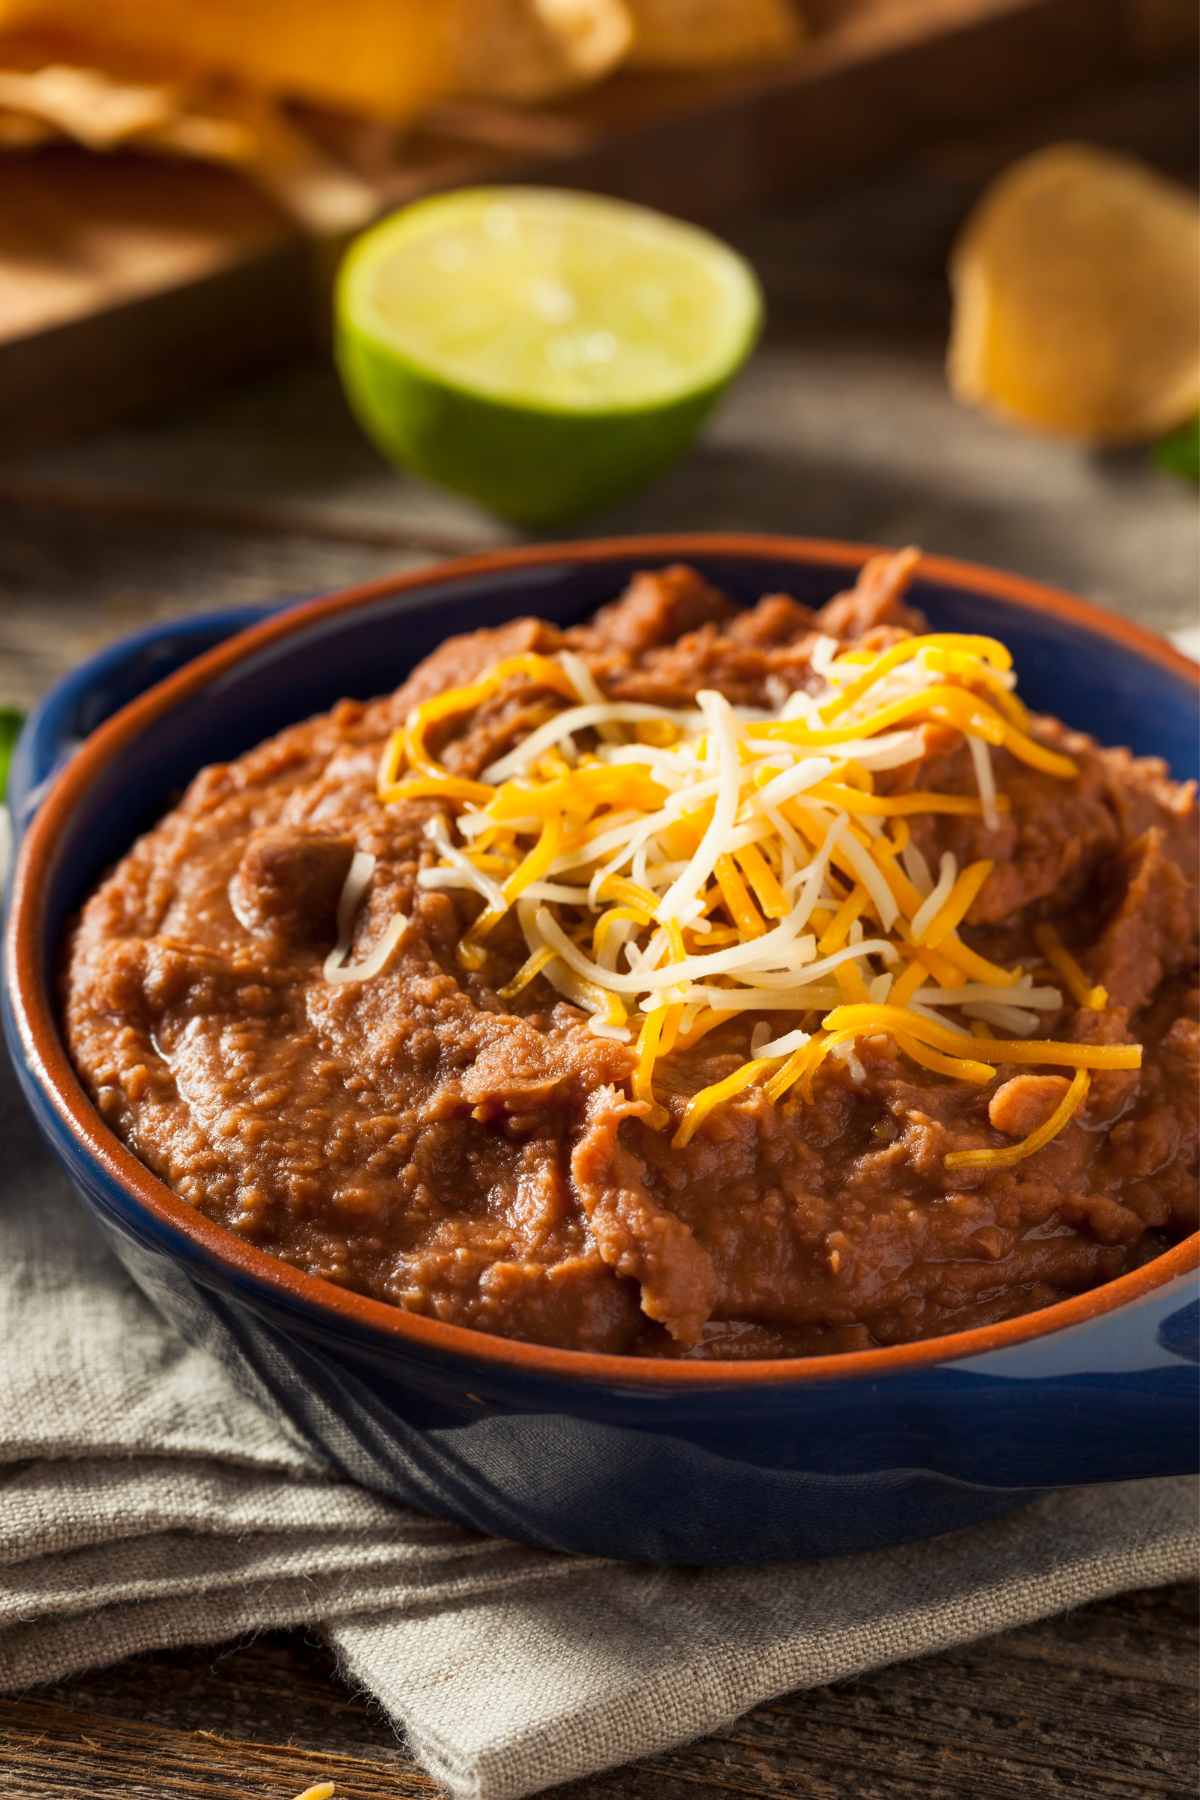 Are refried beans keto? How many carbs are in a classic refried bean? We know they’re the perfect side dish for your next Taco Tuesday. They’re a staple in Mexican cuisine. The question is…are they ketogenic? Read on to learn more about refried beans.